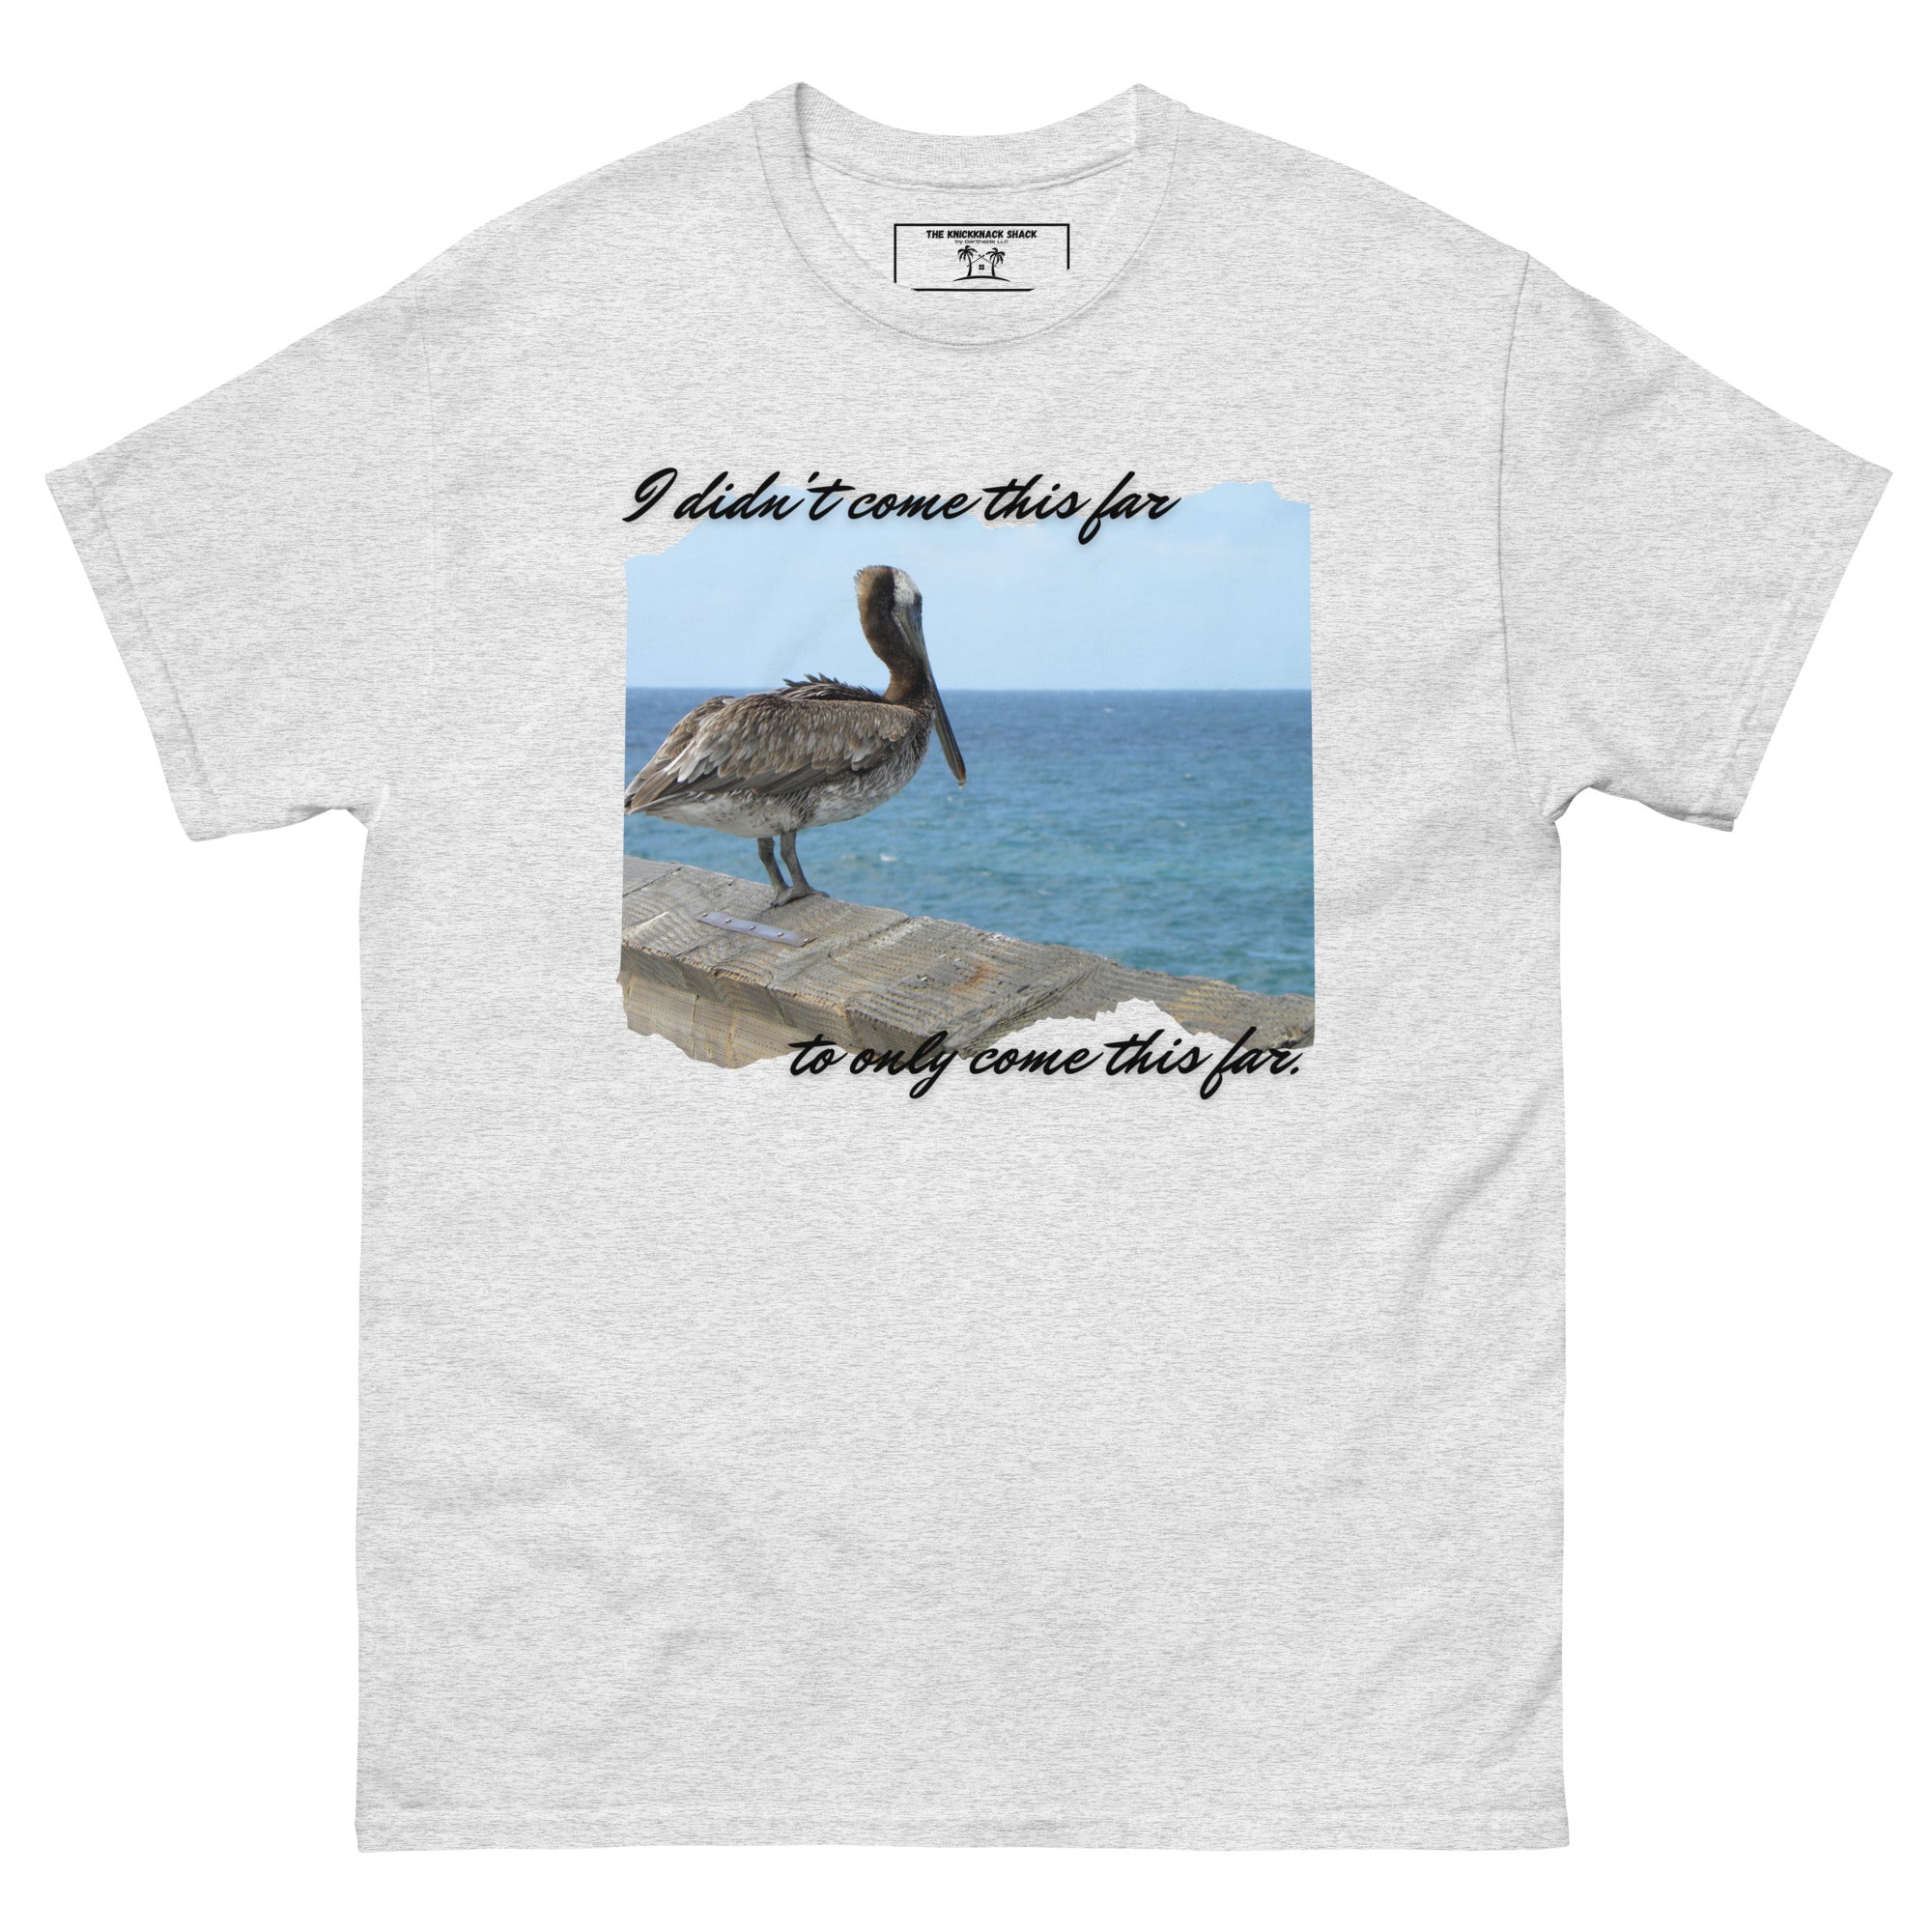 Classic Tee - I Didn't Come This Far (Light Colors)